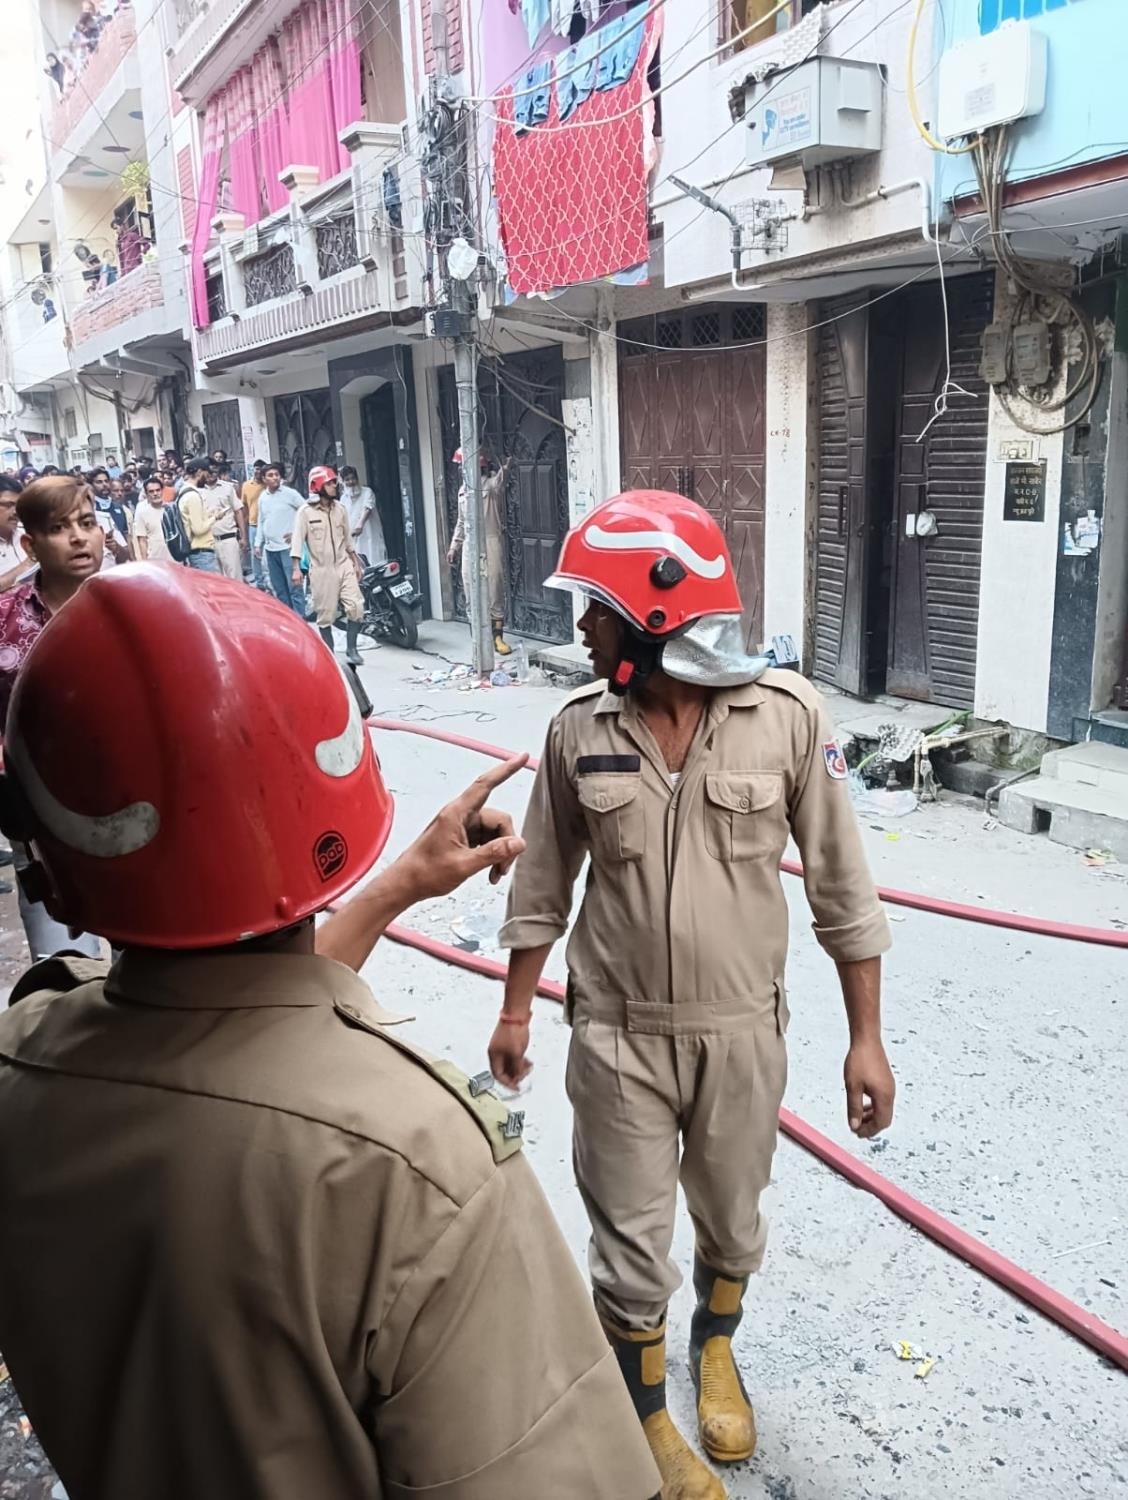  Fire In Delhi Madarsa, Around 100 Rescued, Two Firefighters Injured (Lead) 